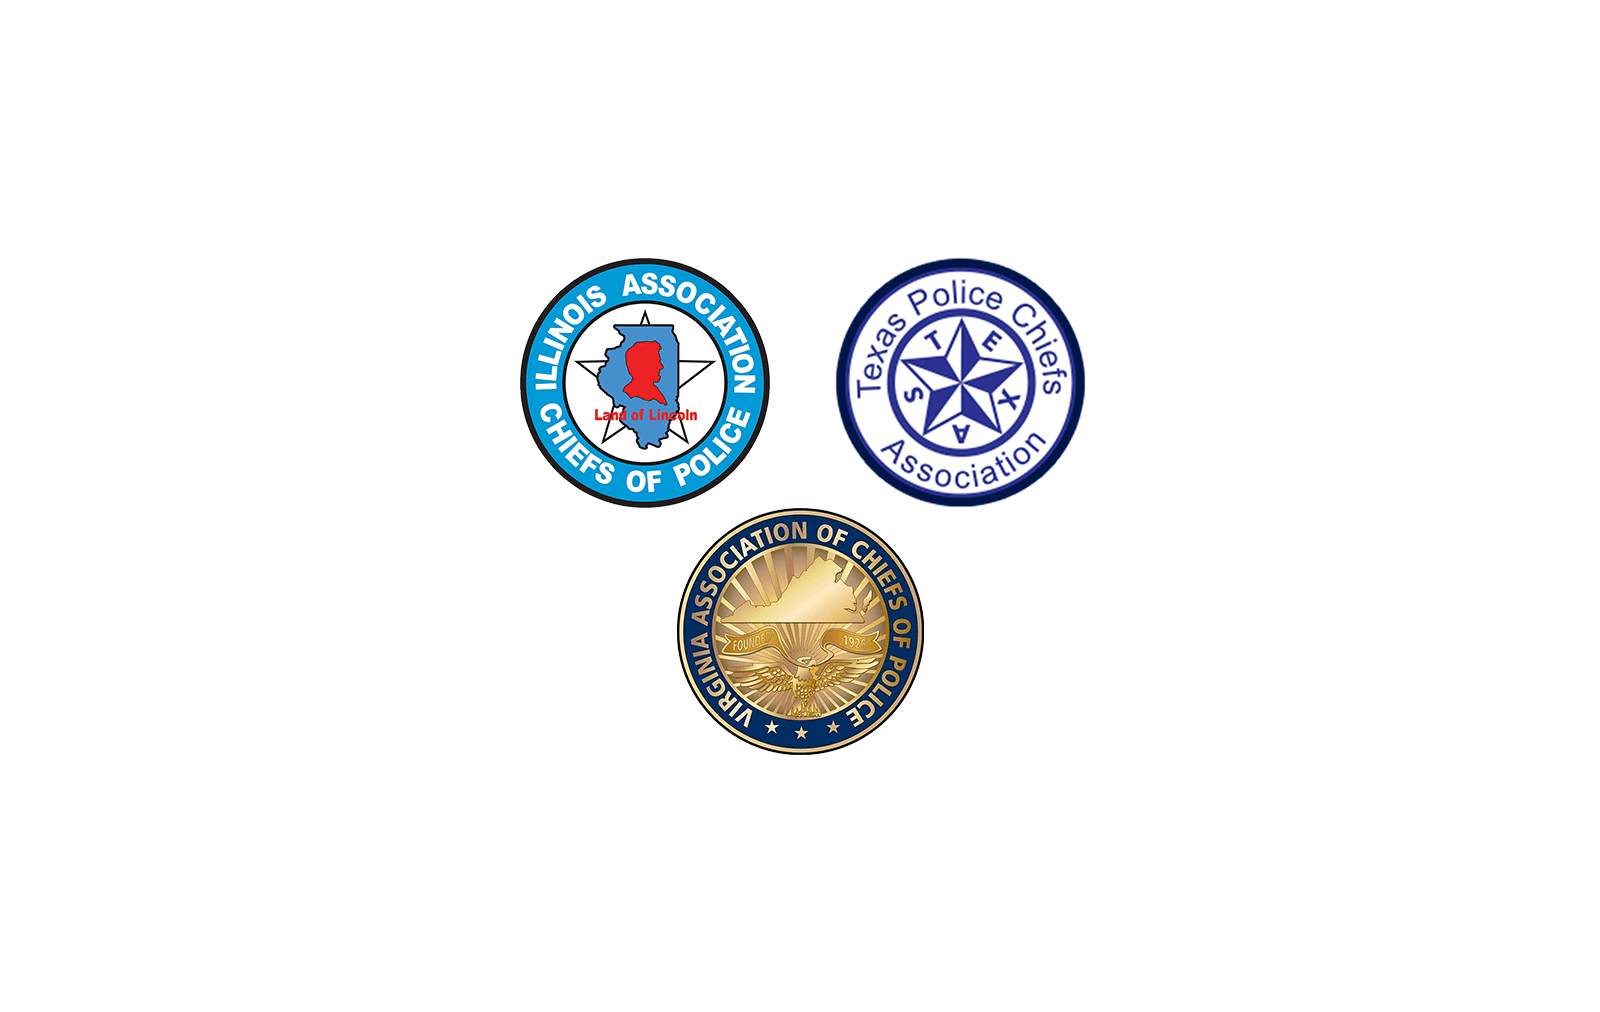 CRG Announces Partnership with Chiefs of Police Associations in Virginia, Texas, and Illinois